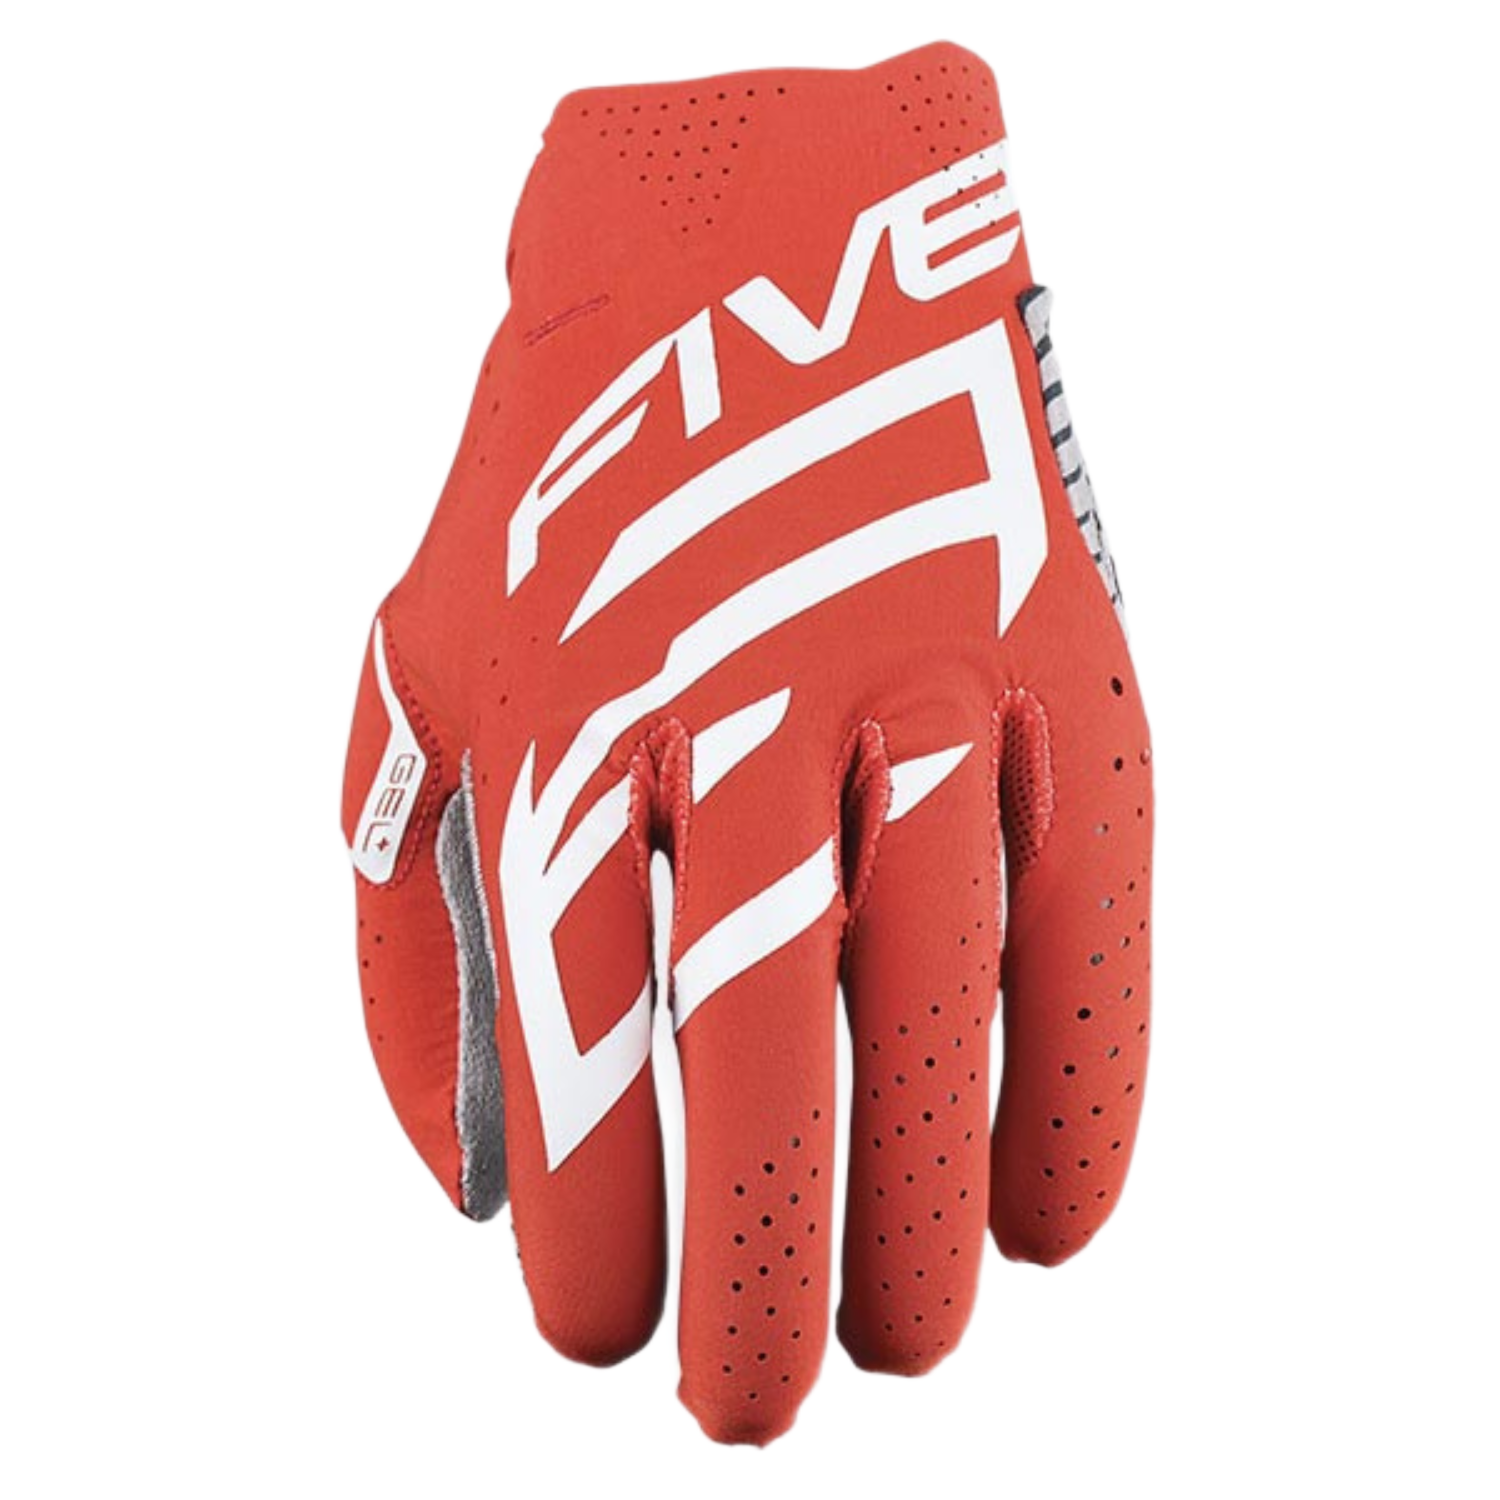 Image of Five MXF Race Gloves Red Size L ID 3841300111686